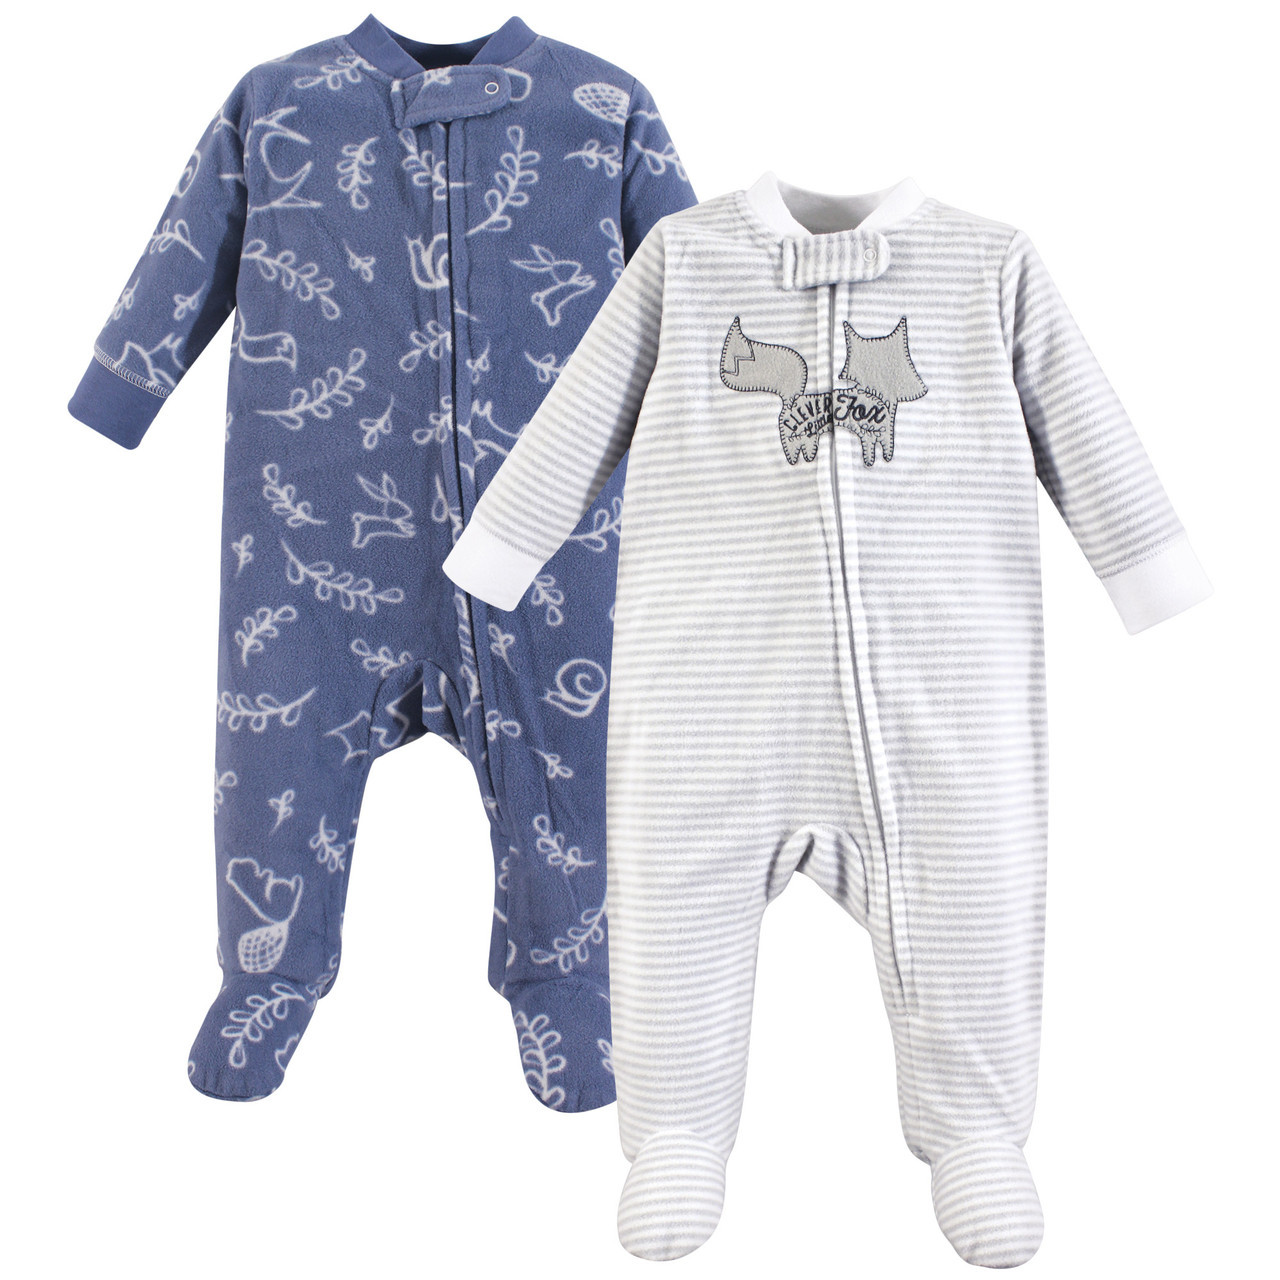 Yoga Sprout Fleece Sleep and Play, 2-Pack, Forest | Baby and Toddler ...